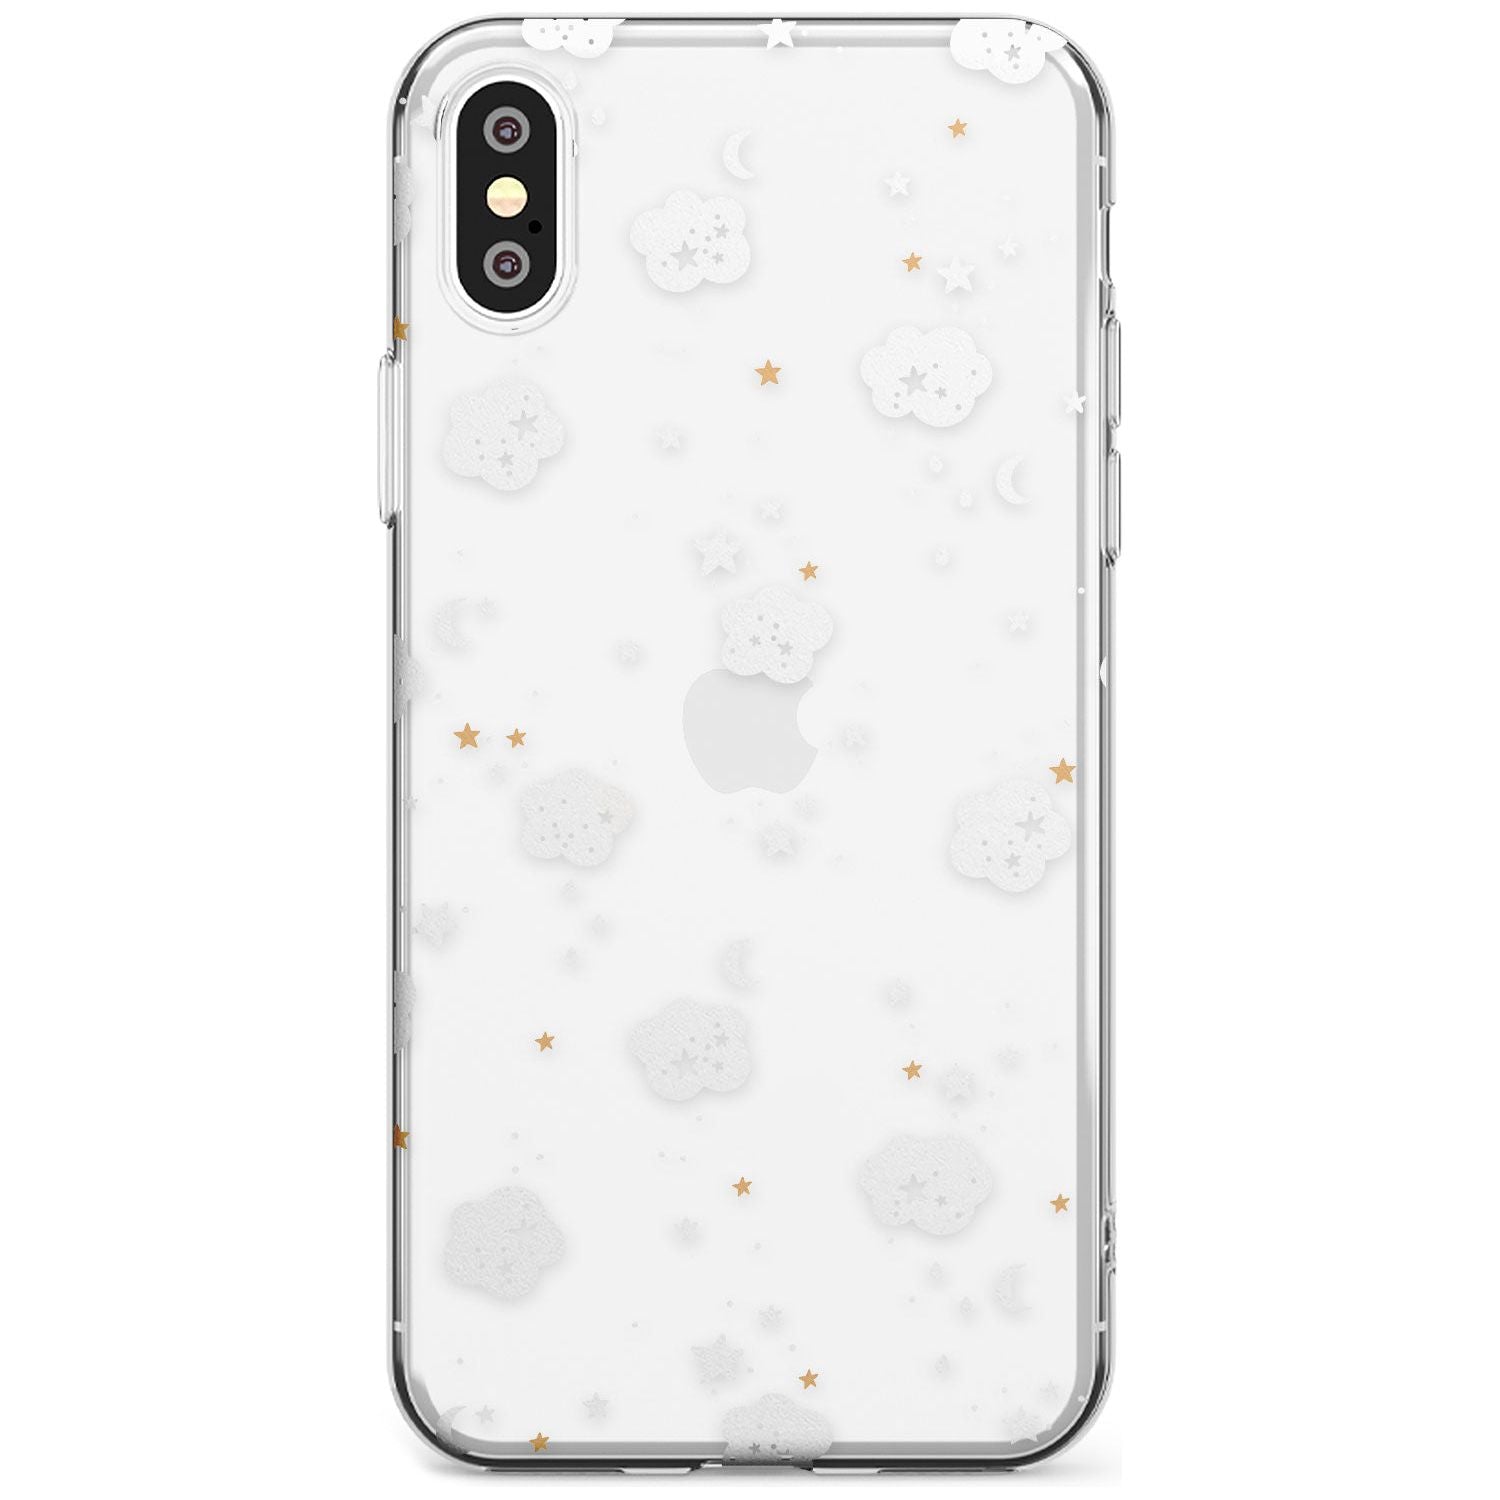 Stars & Clouds Black Impact Phone Case for iPhone X XS Max XR